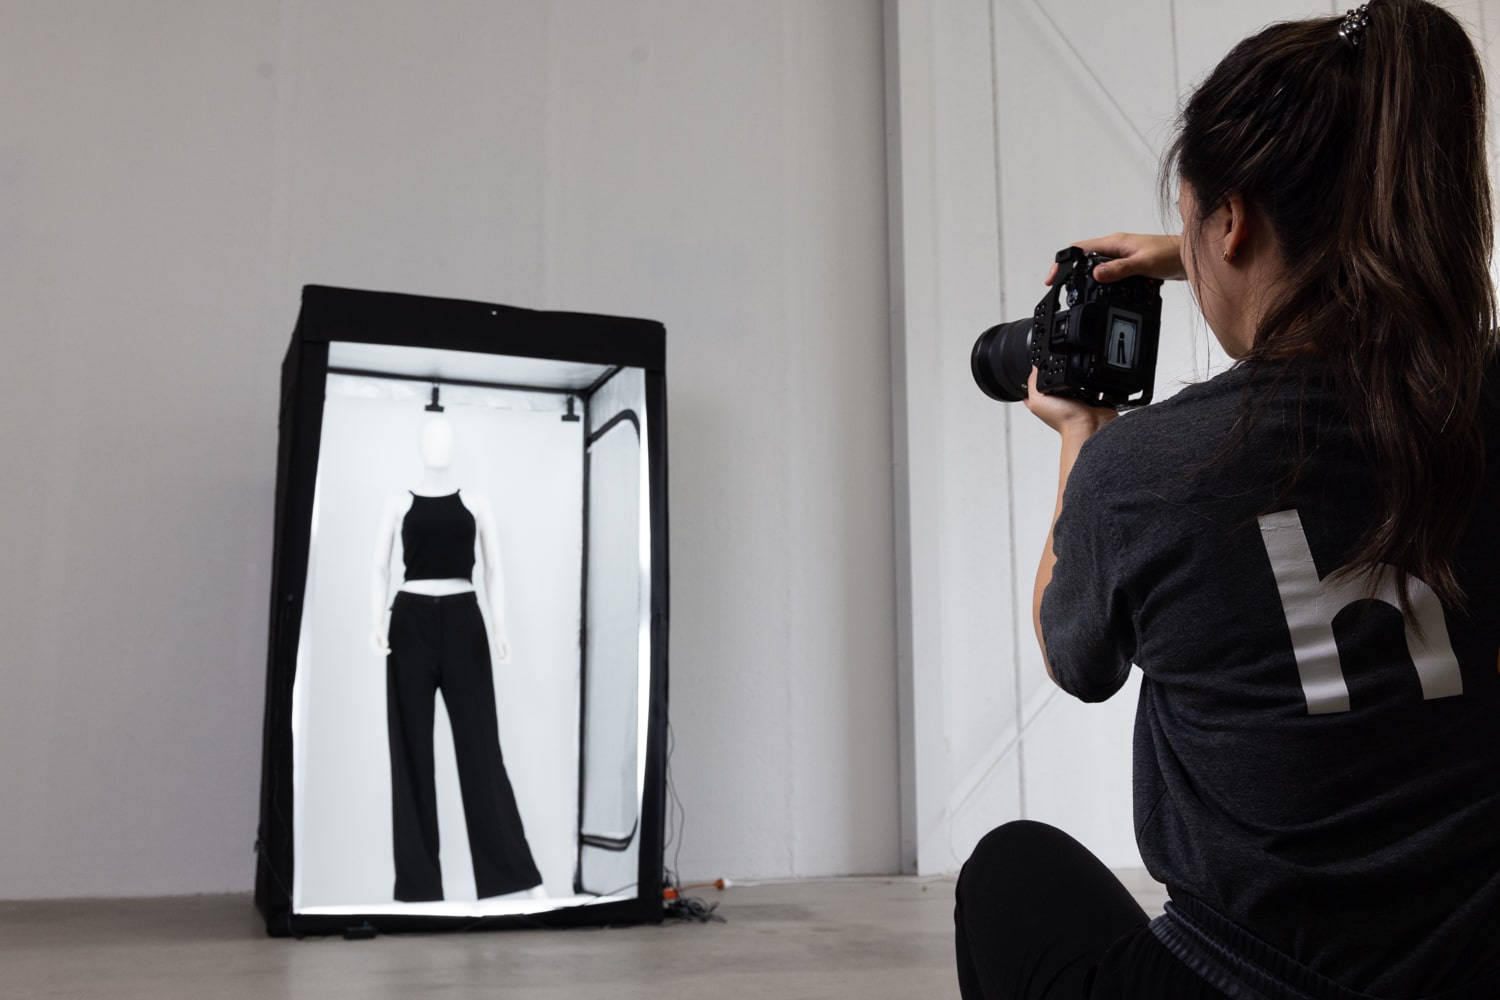 An image showing a photographer taking a picture of a black halter top and black pants displayed on a mannequin, inside a mini studio designed for fashion photography.